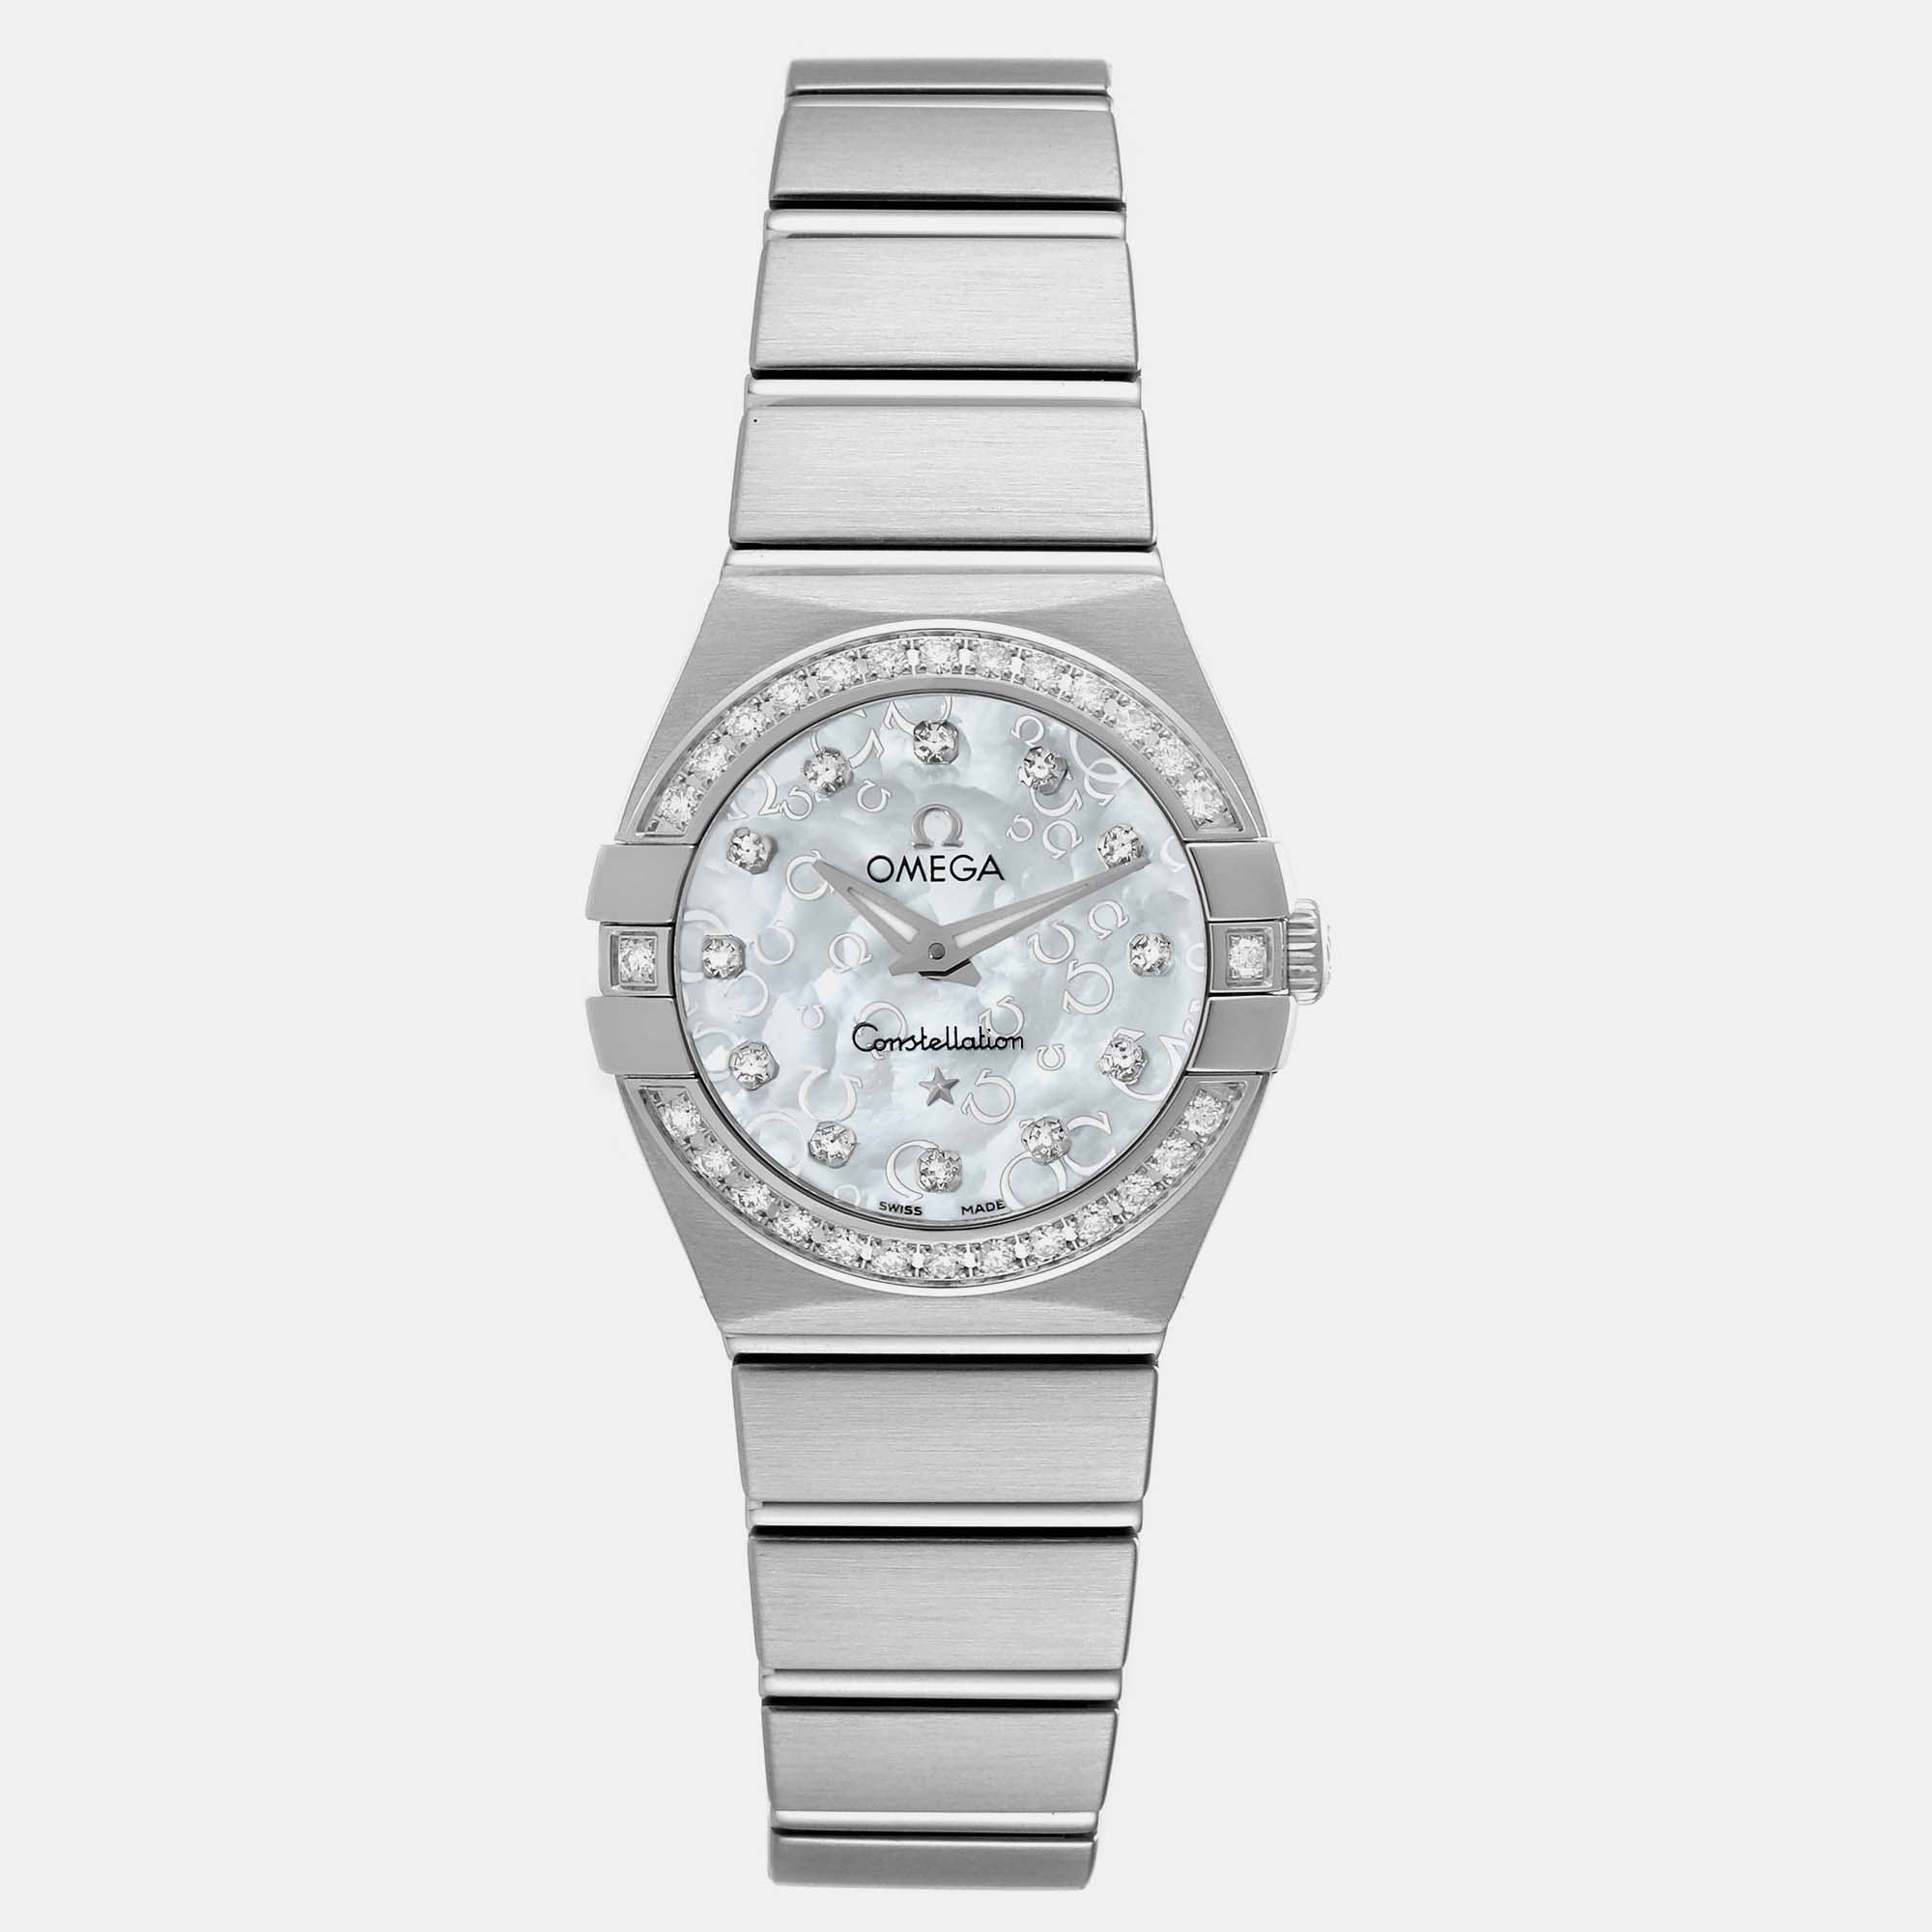 

Omega Mother Of Pearl Diamond Stainless Steel Constellation 123.15.24.60.52.001 Quartz Women's Wristwatch 24 mm, Silver